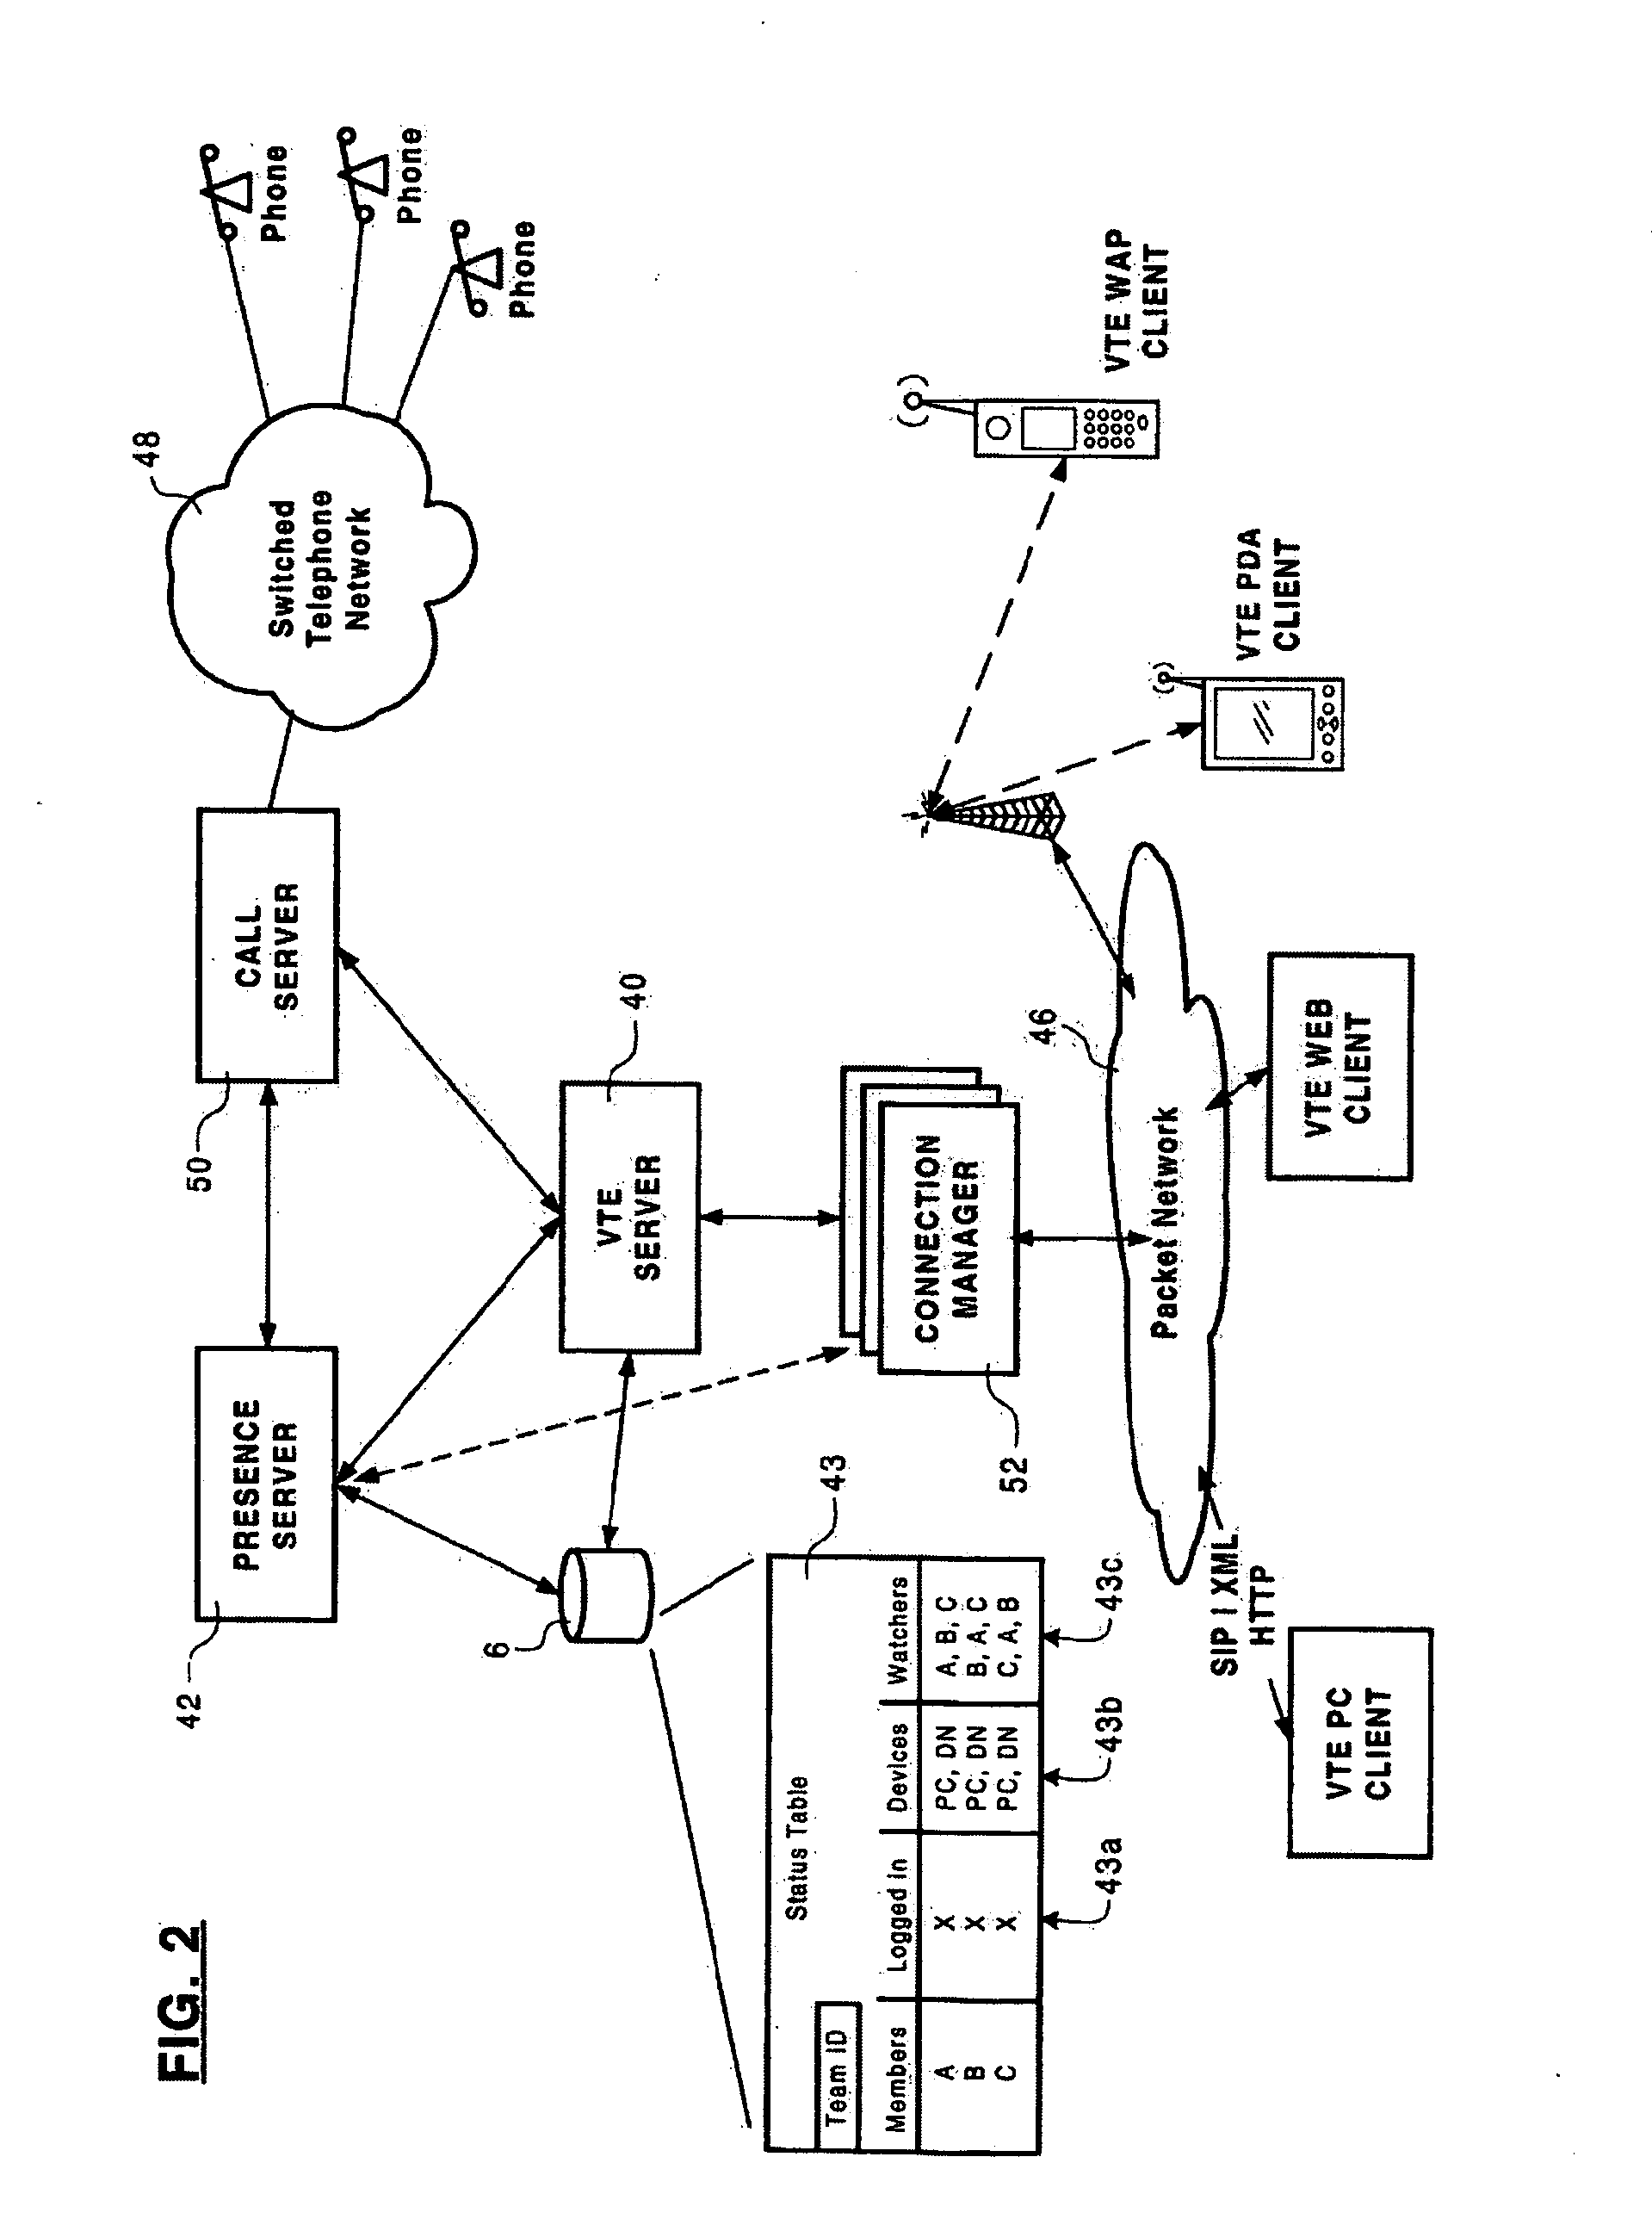 Method and system for supporting communications within a virtual team environment